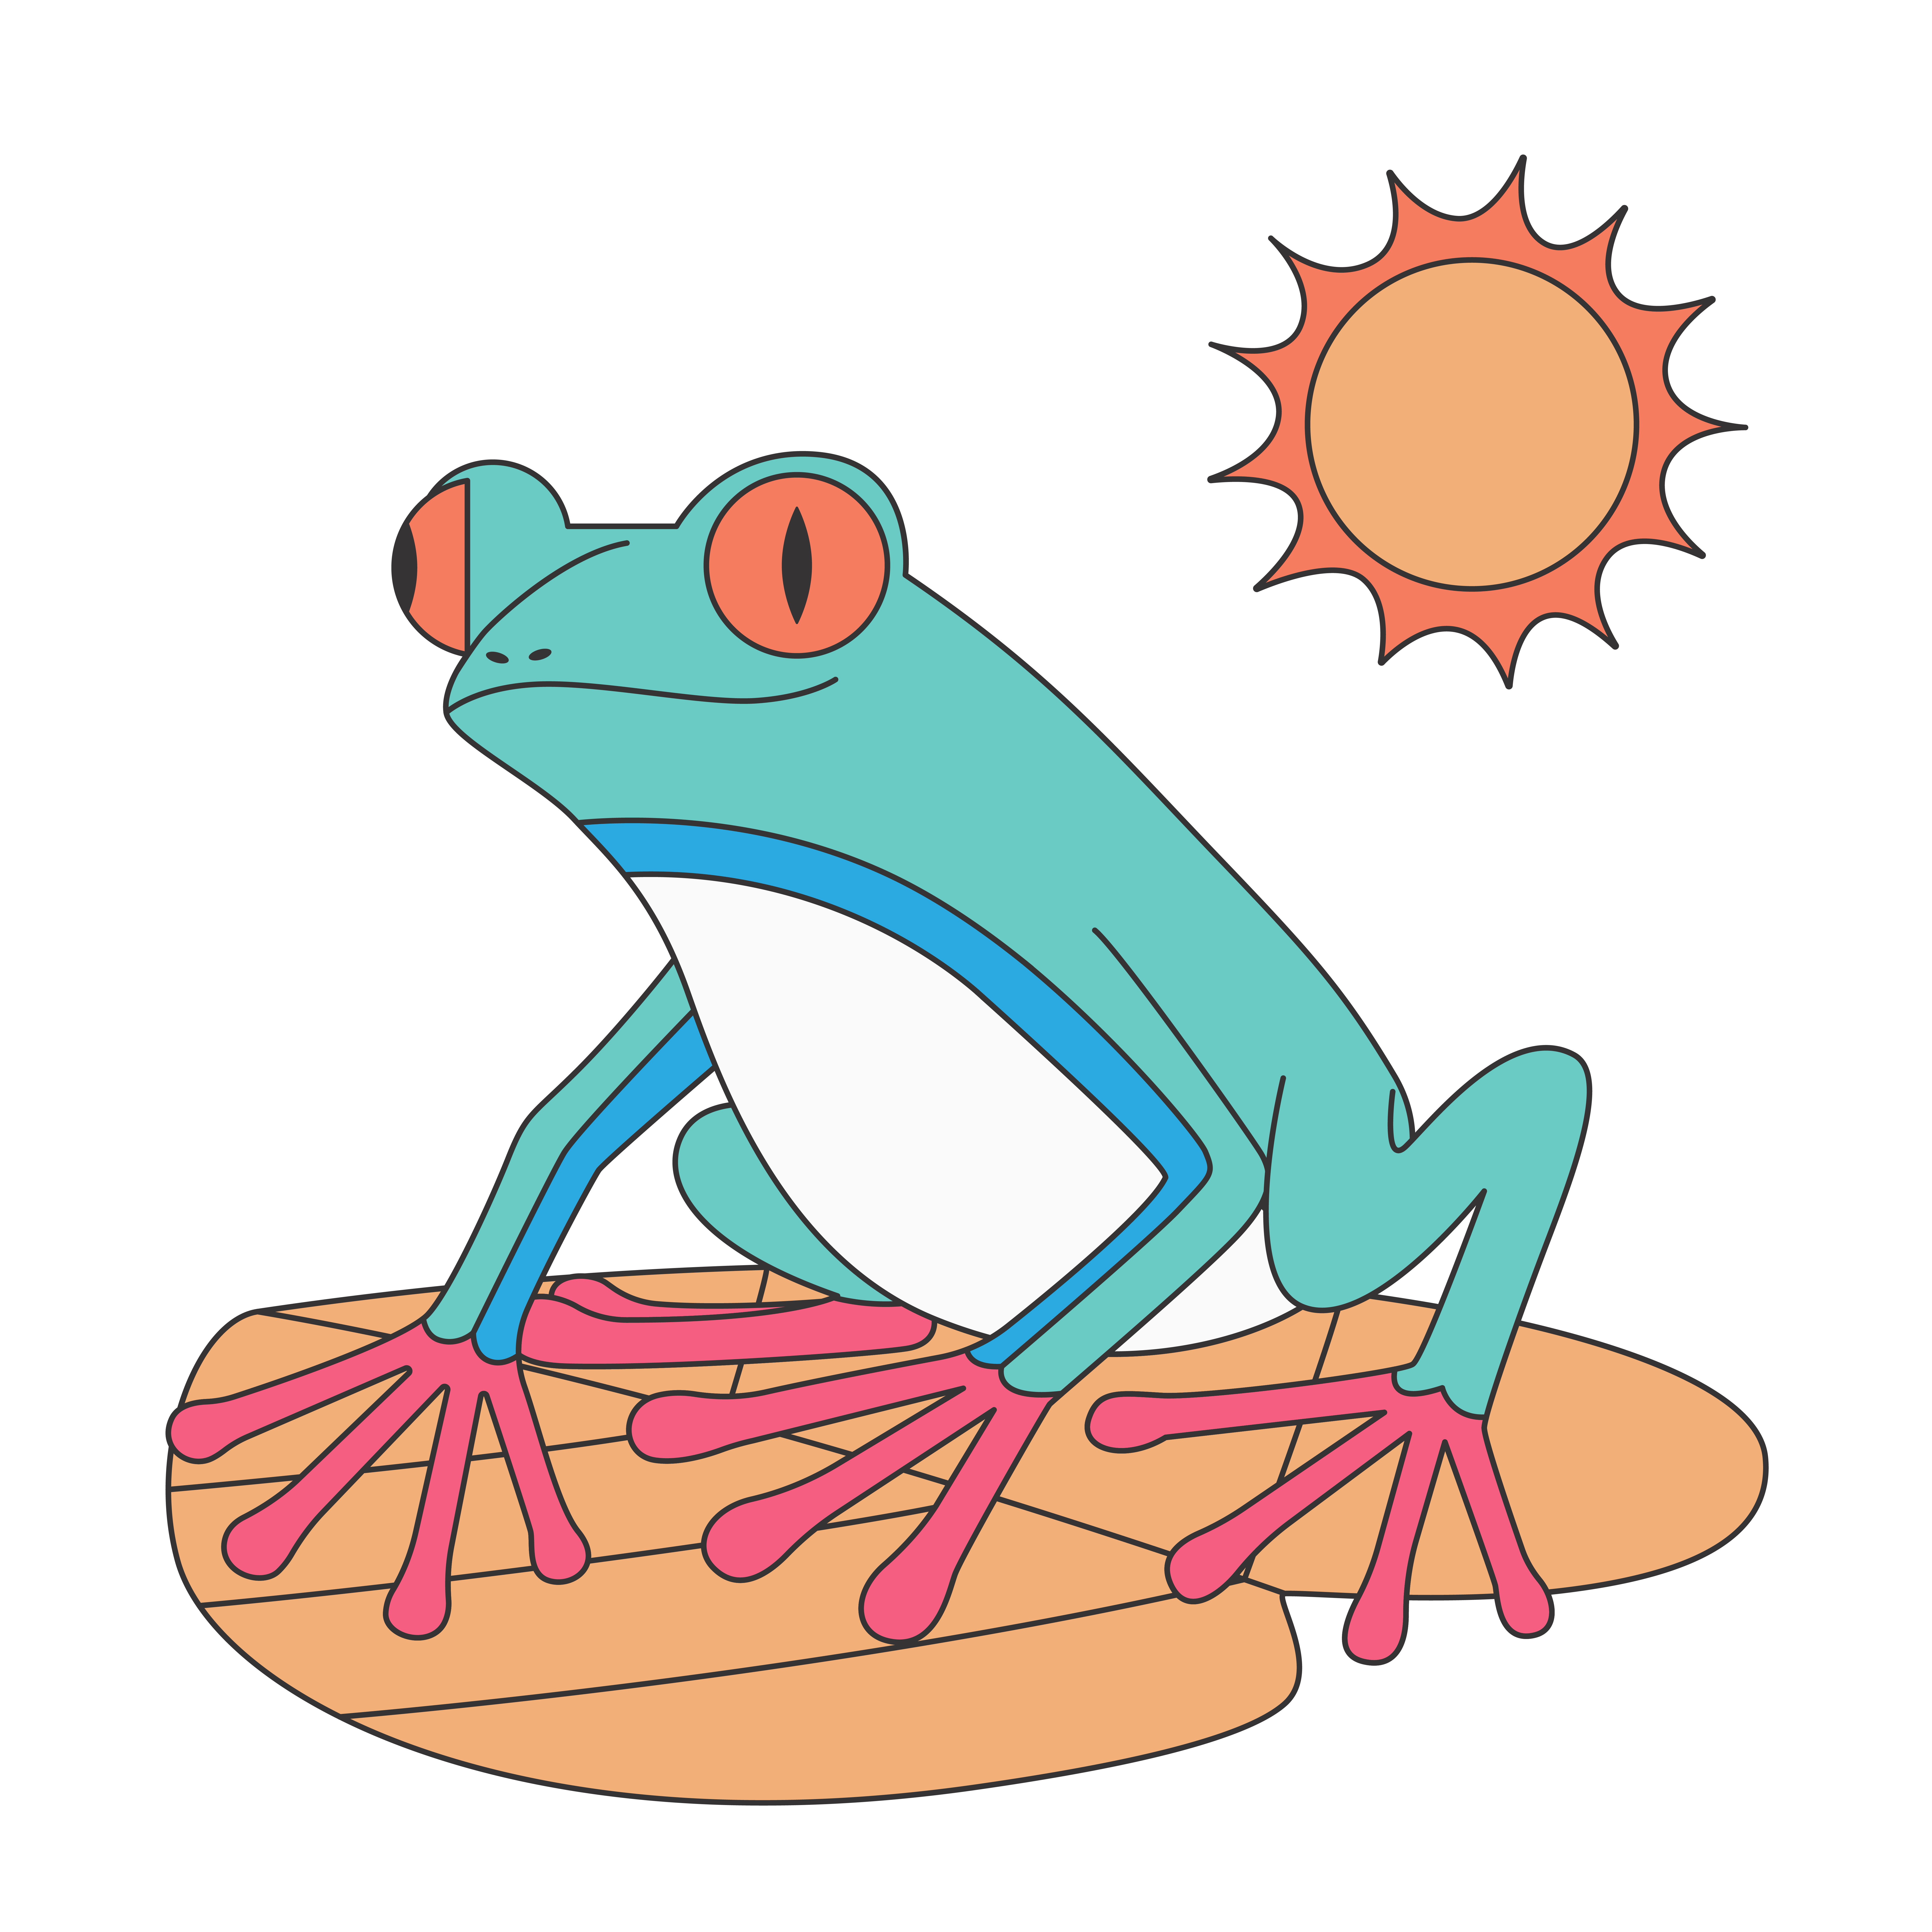 Hand drawn vector image of a tree frog on a lily pad with the sun out